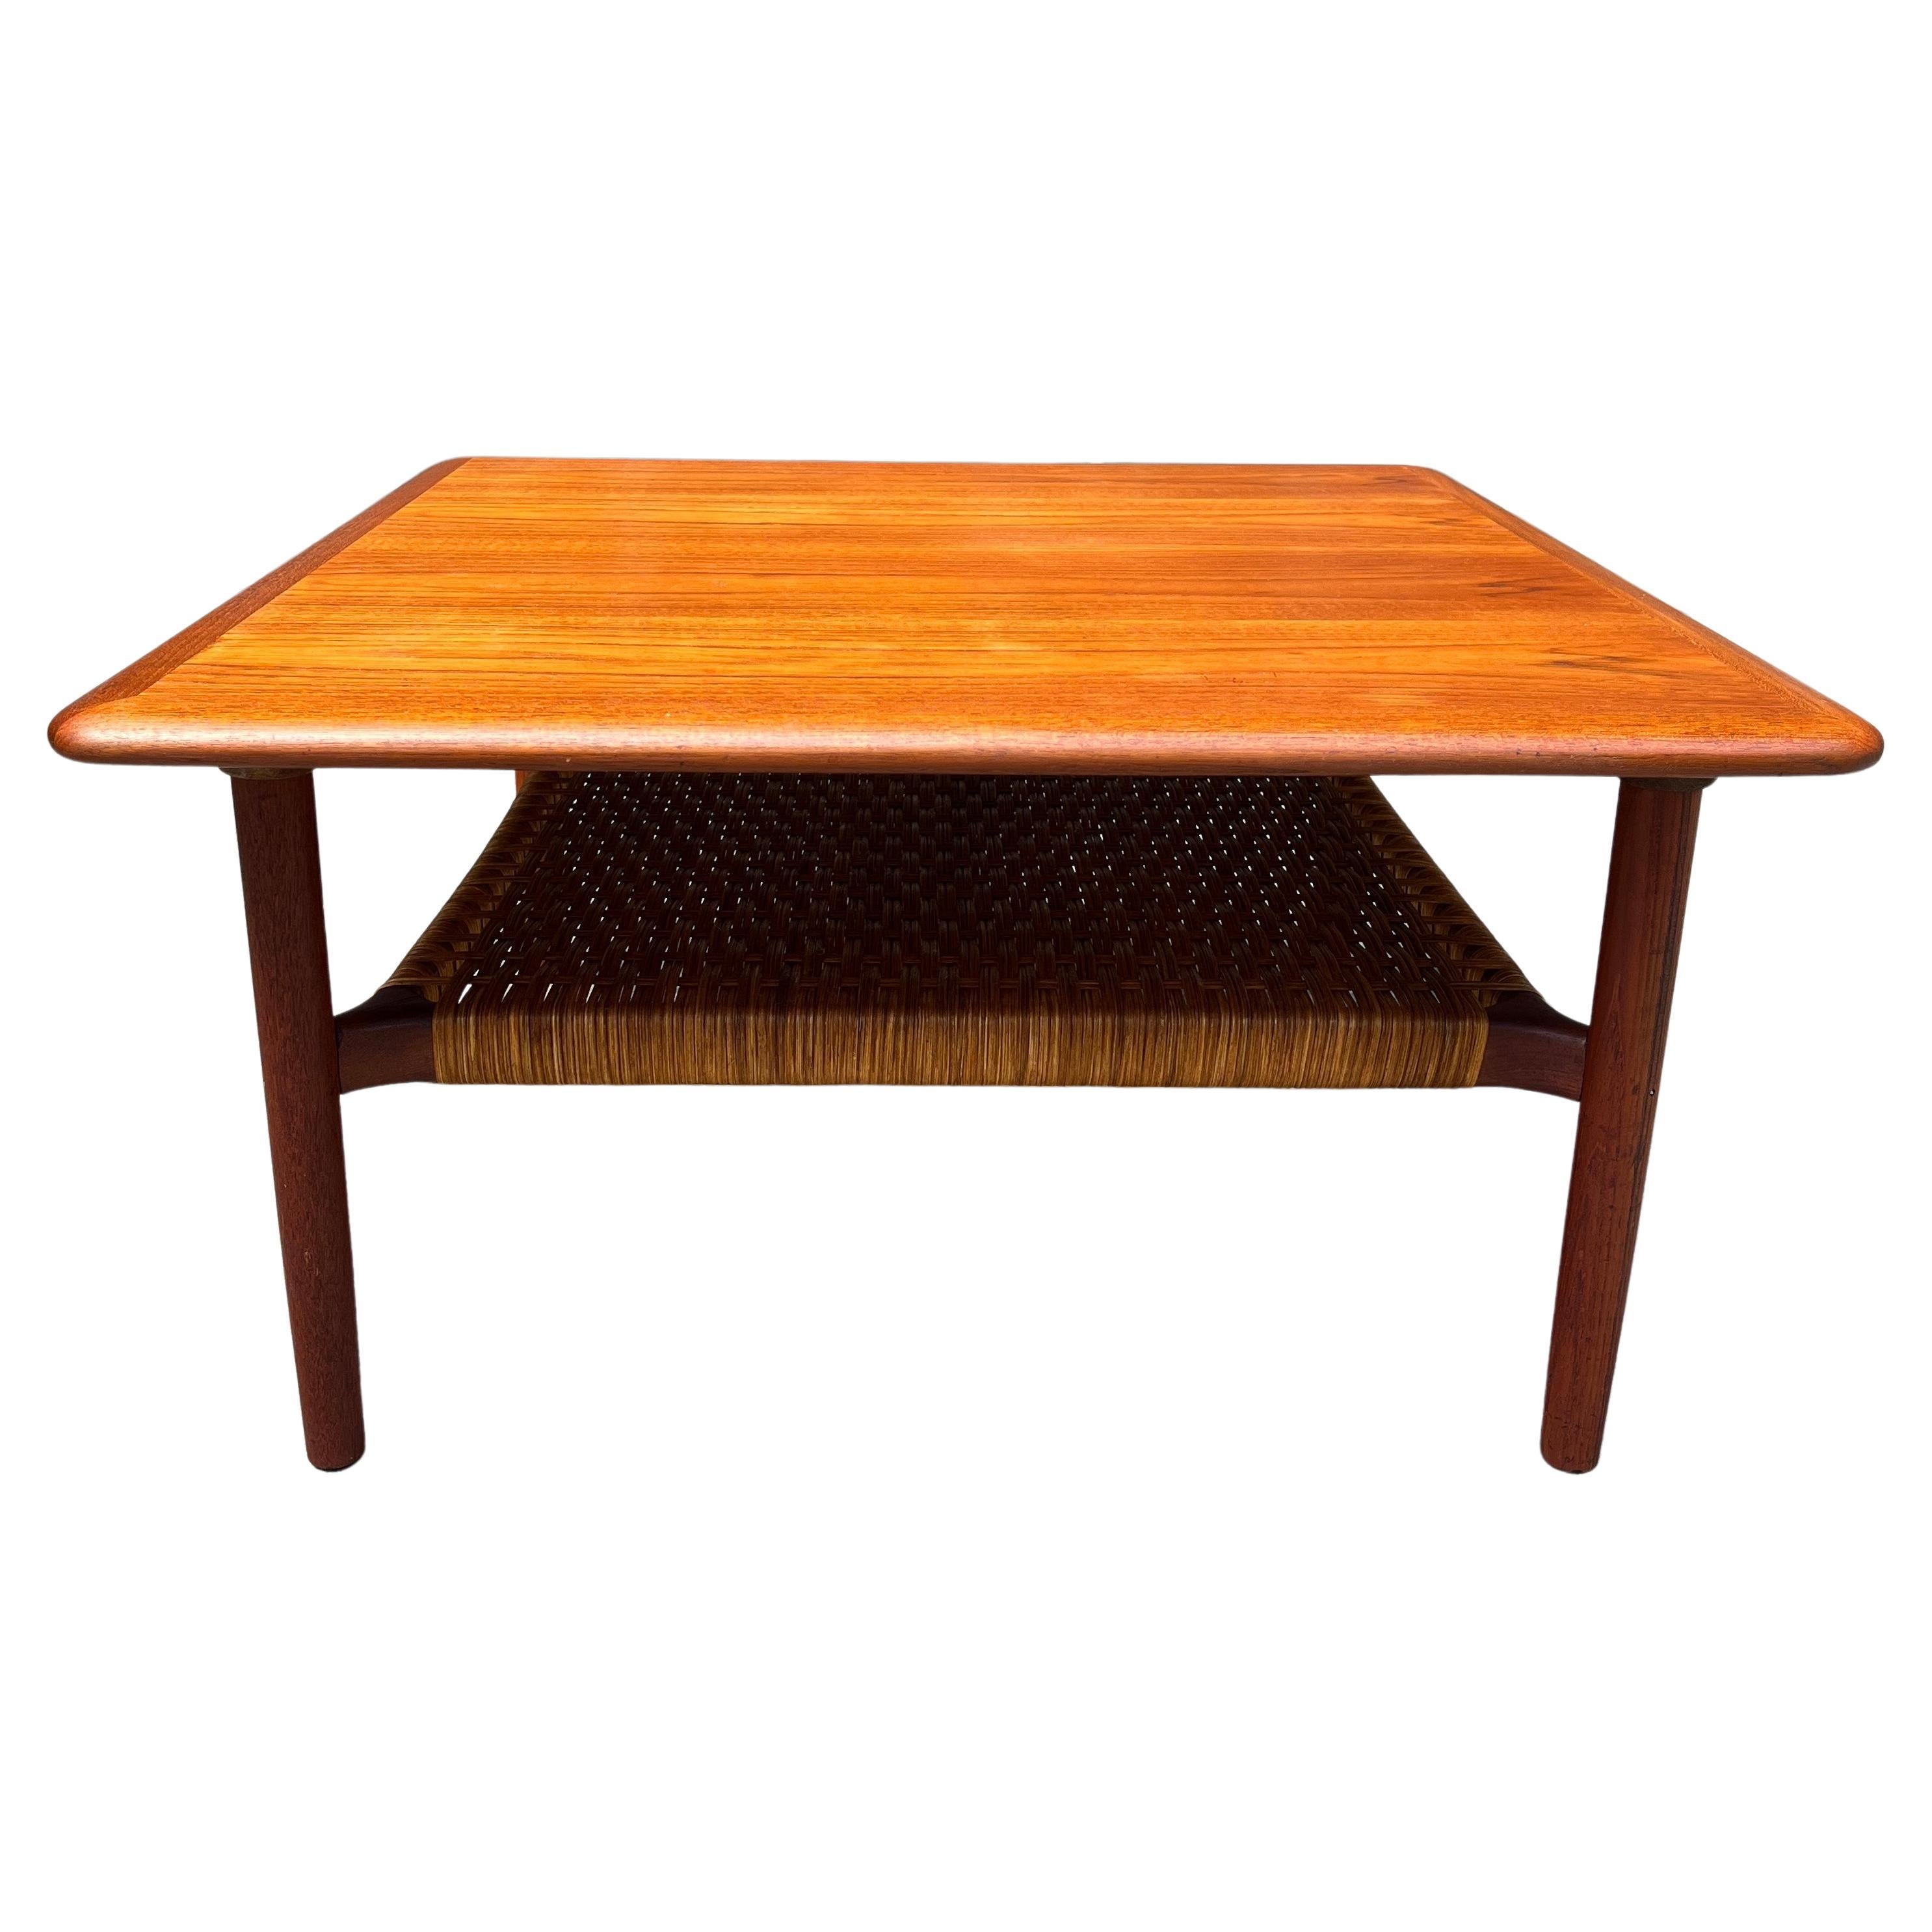 Classic Danish Modern Midcentury coffee table by Gunnar Schwartz. Teak wood with woven cane undershelf. Produced in denmark in the 1950’s. This rectangular table is made out of teak wood and features a woven cane shelf underneath the table top. In